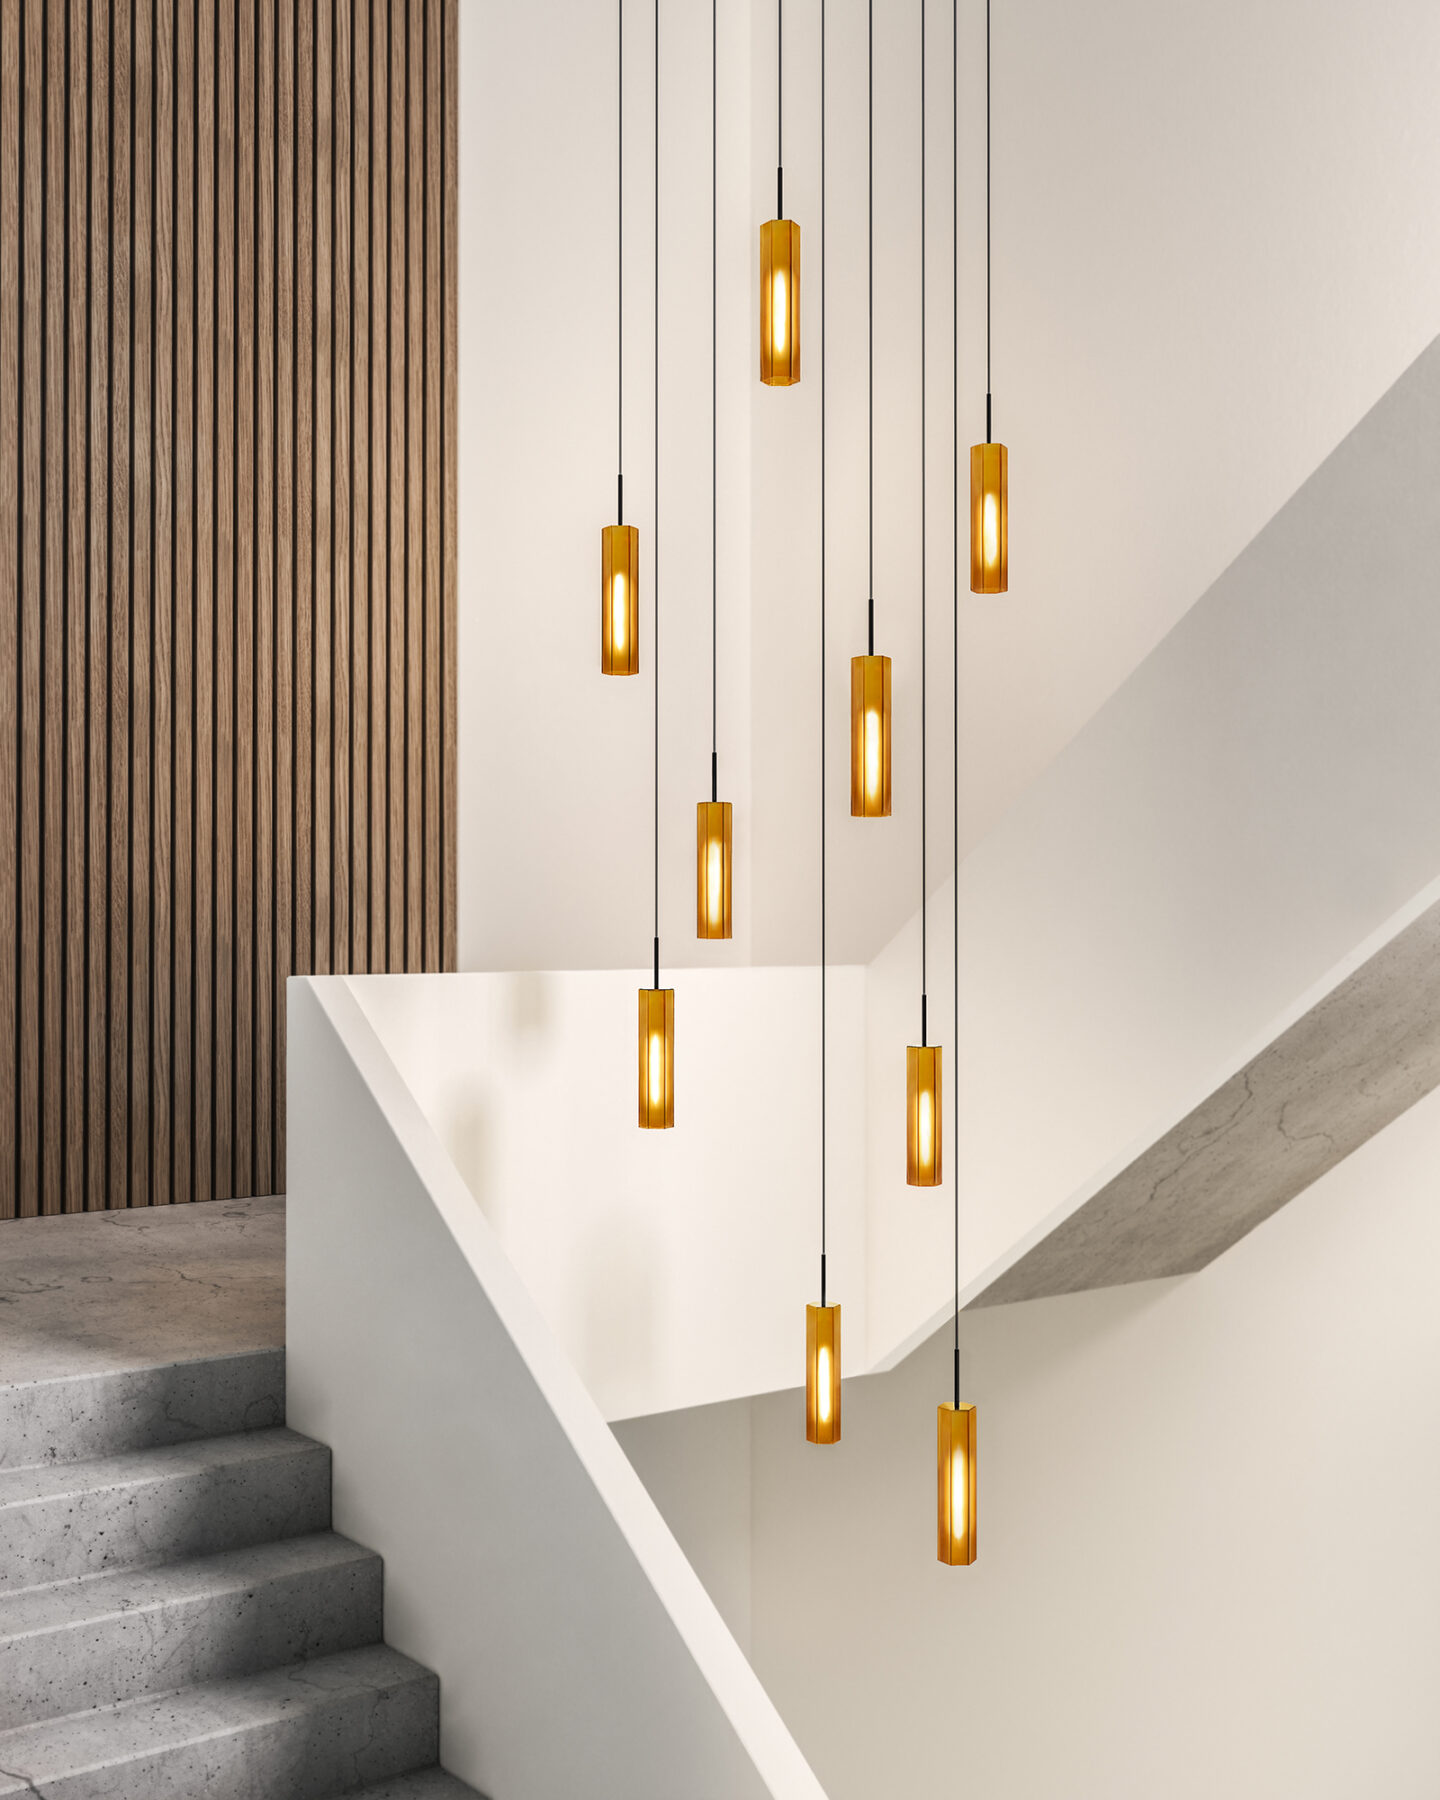 Ensemble of several honey-colored glass lights in a modern stairwell